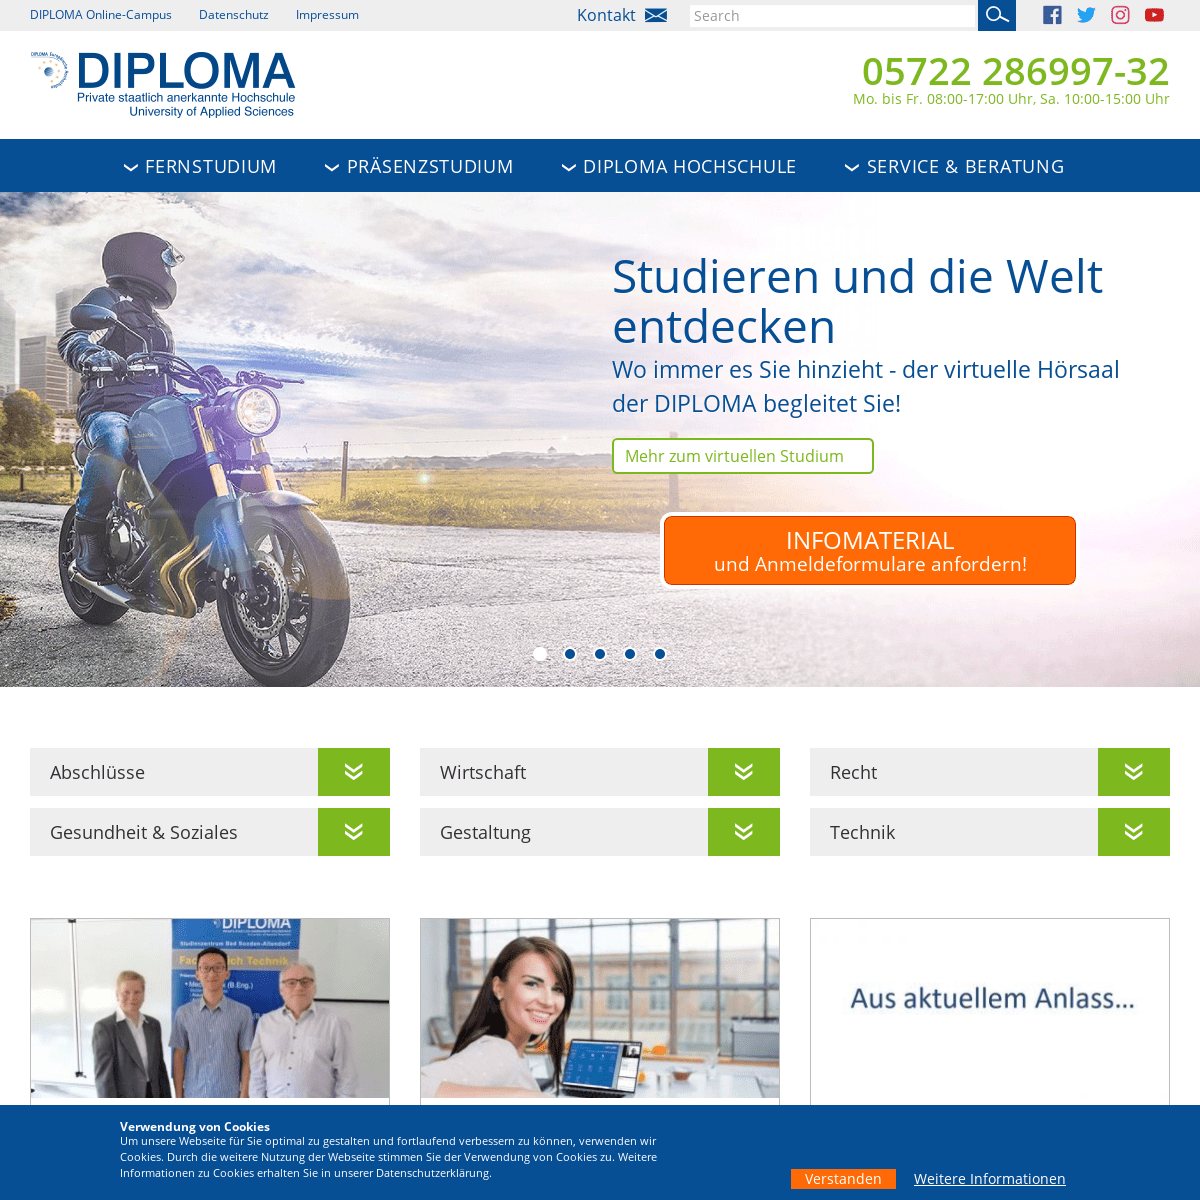 A complete backup of diploma.de